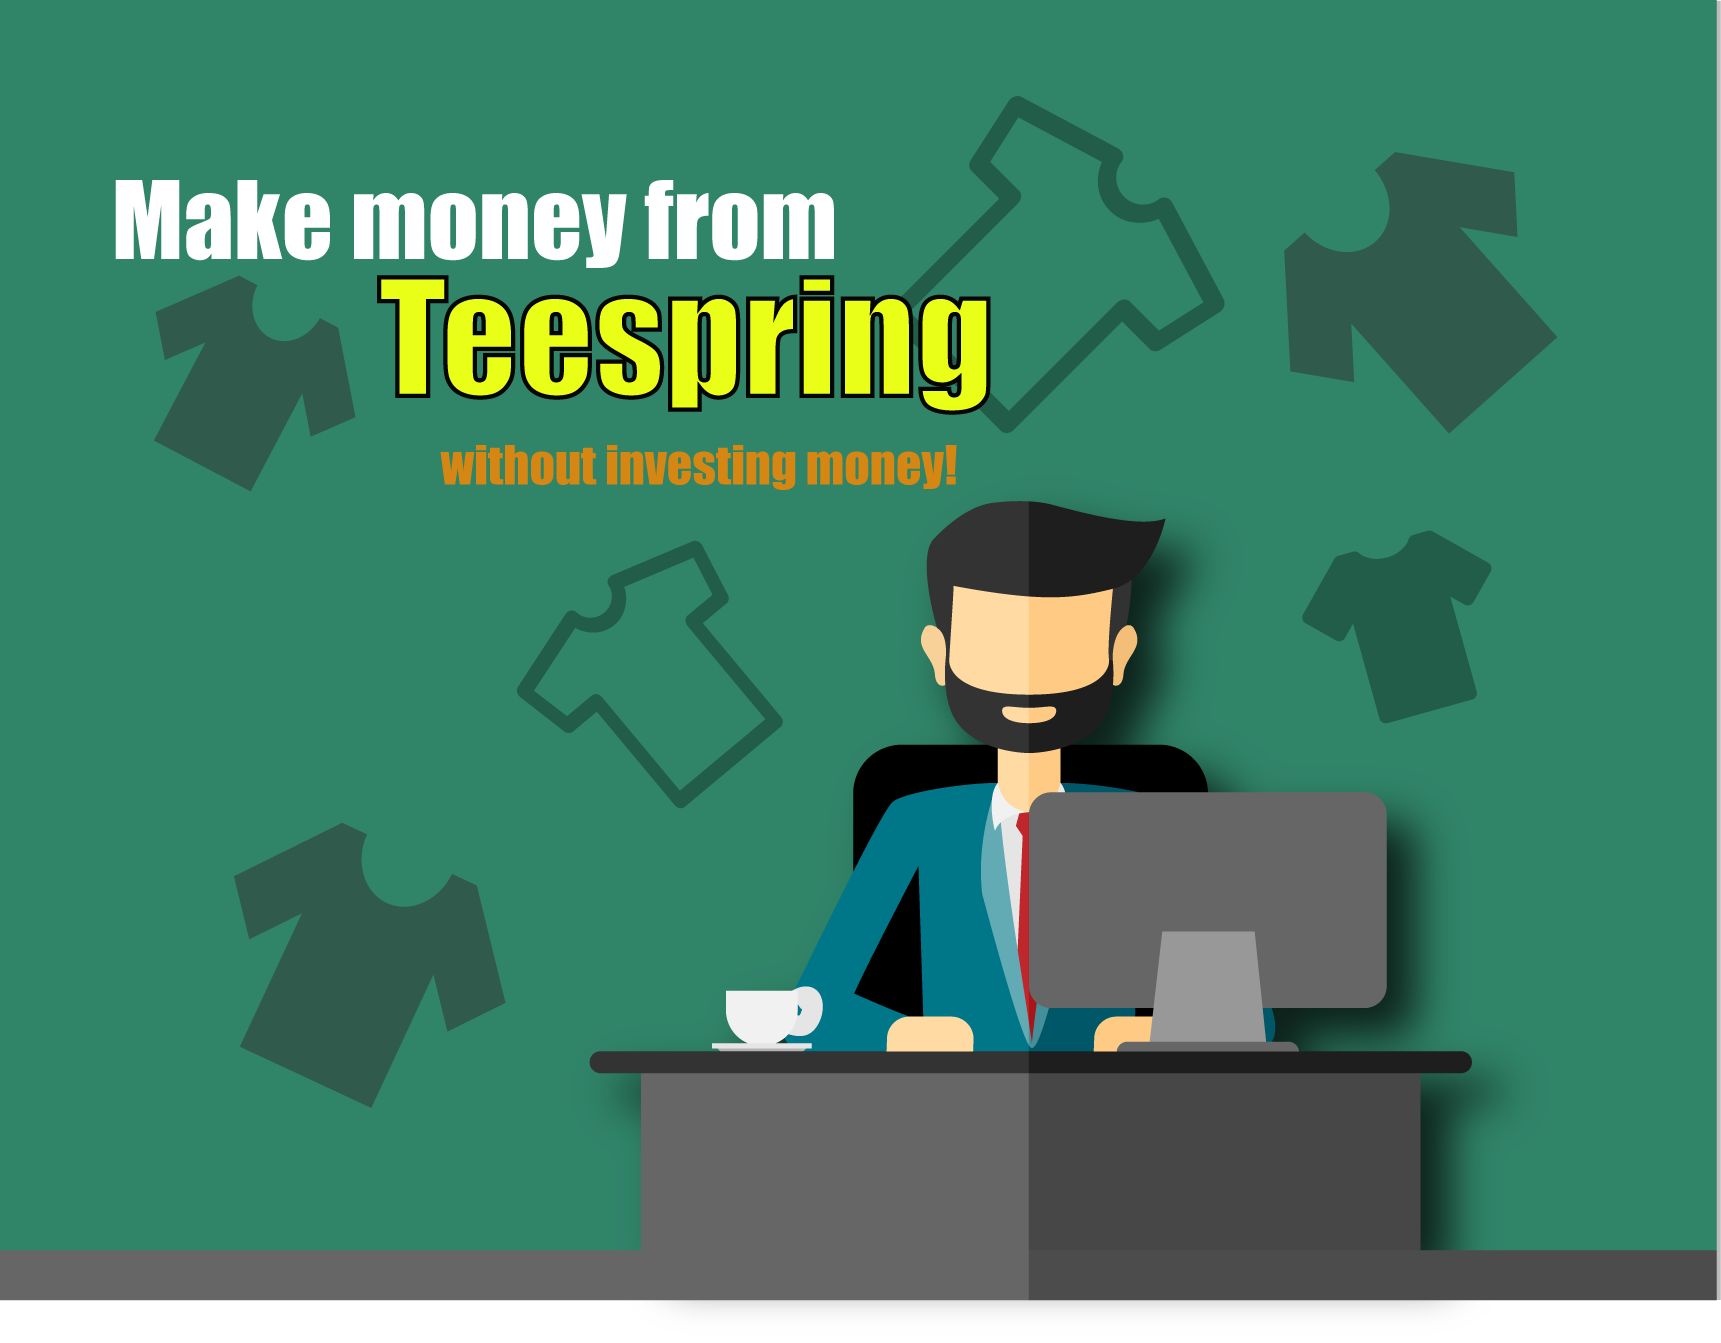 Make money from teespring without investing money